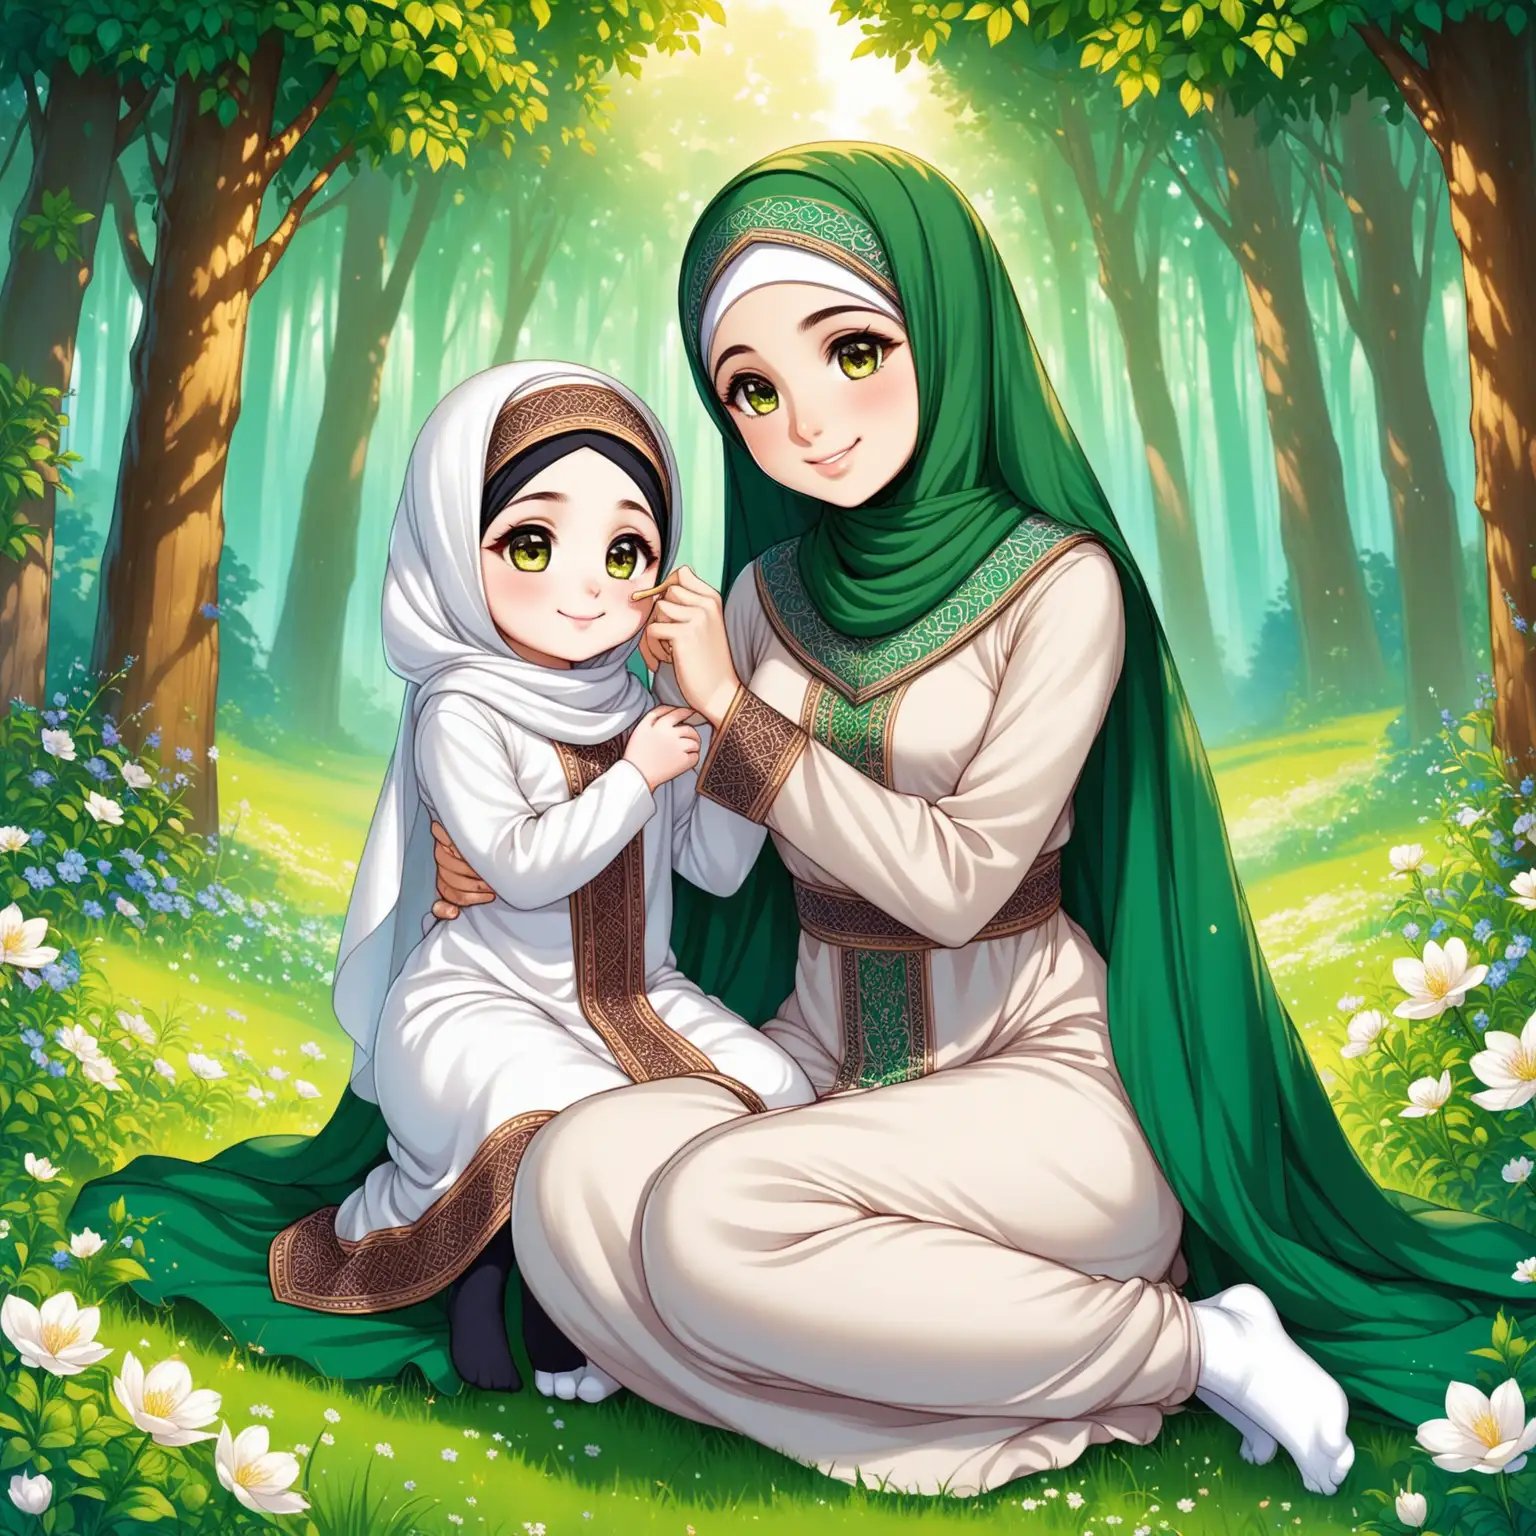 Muslim Girl Fatemeh Showing Respect to Mother in PersianInspired Attire